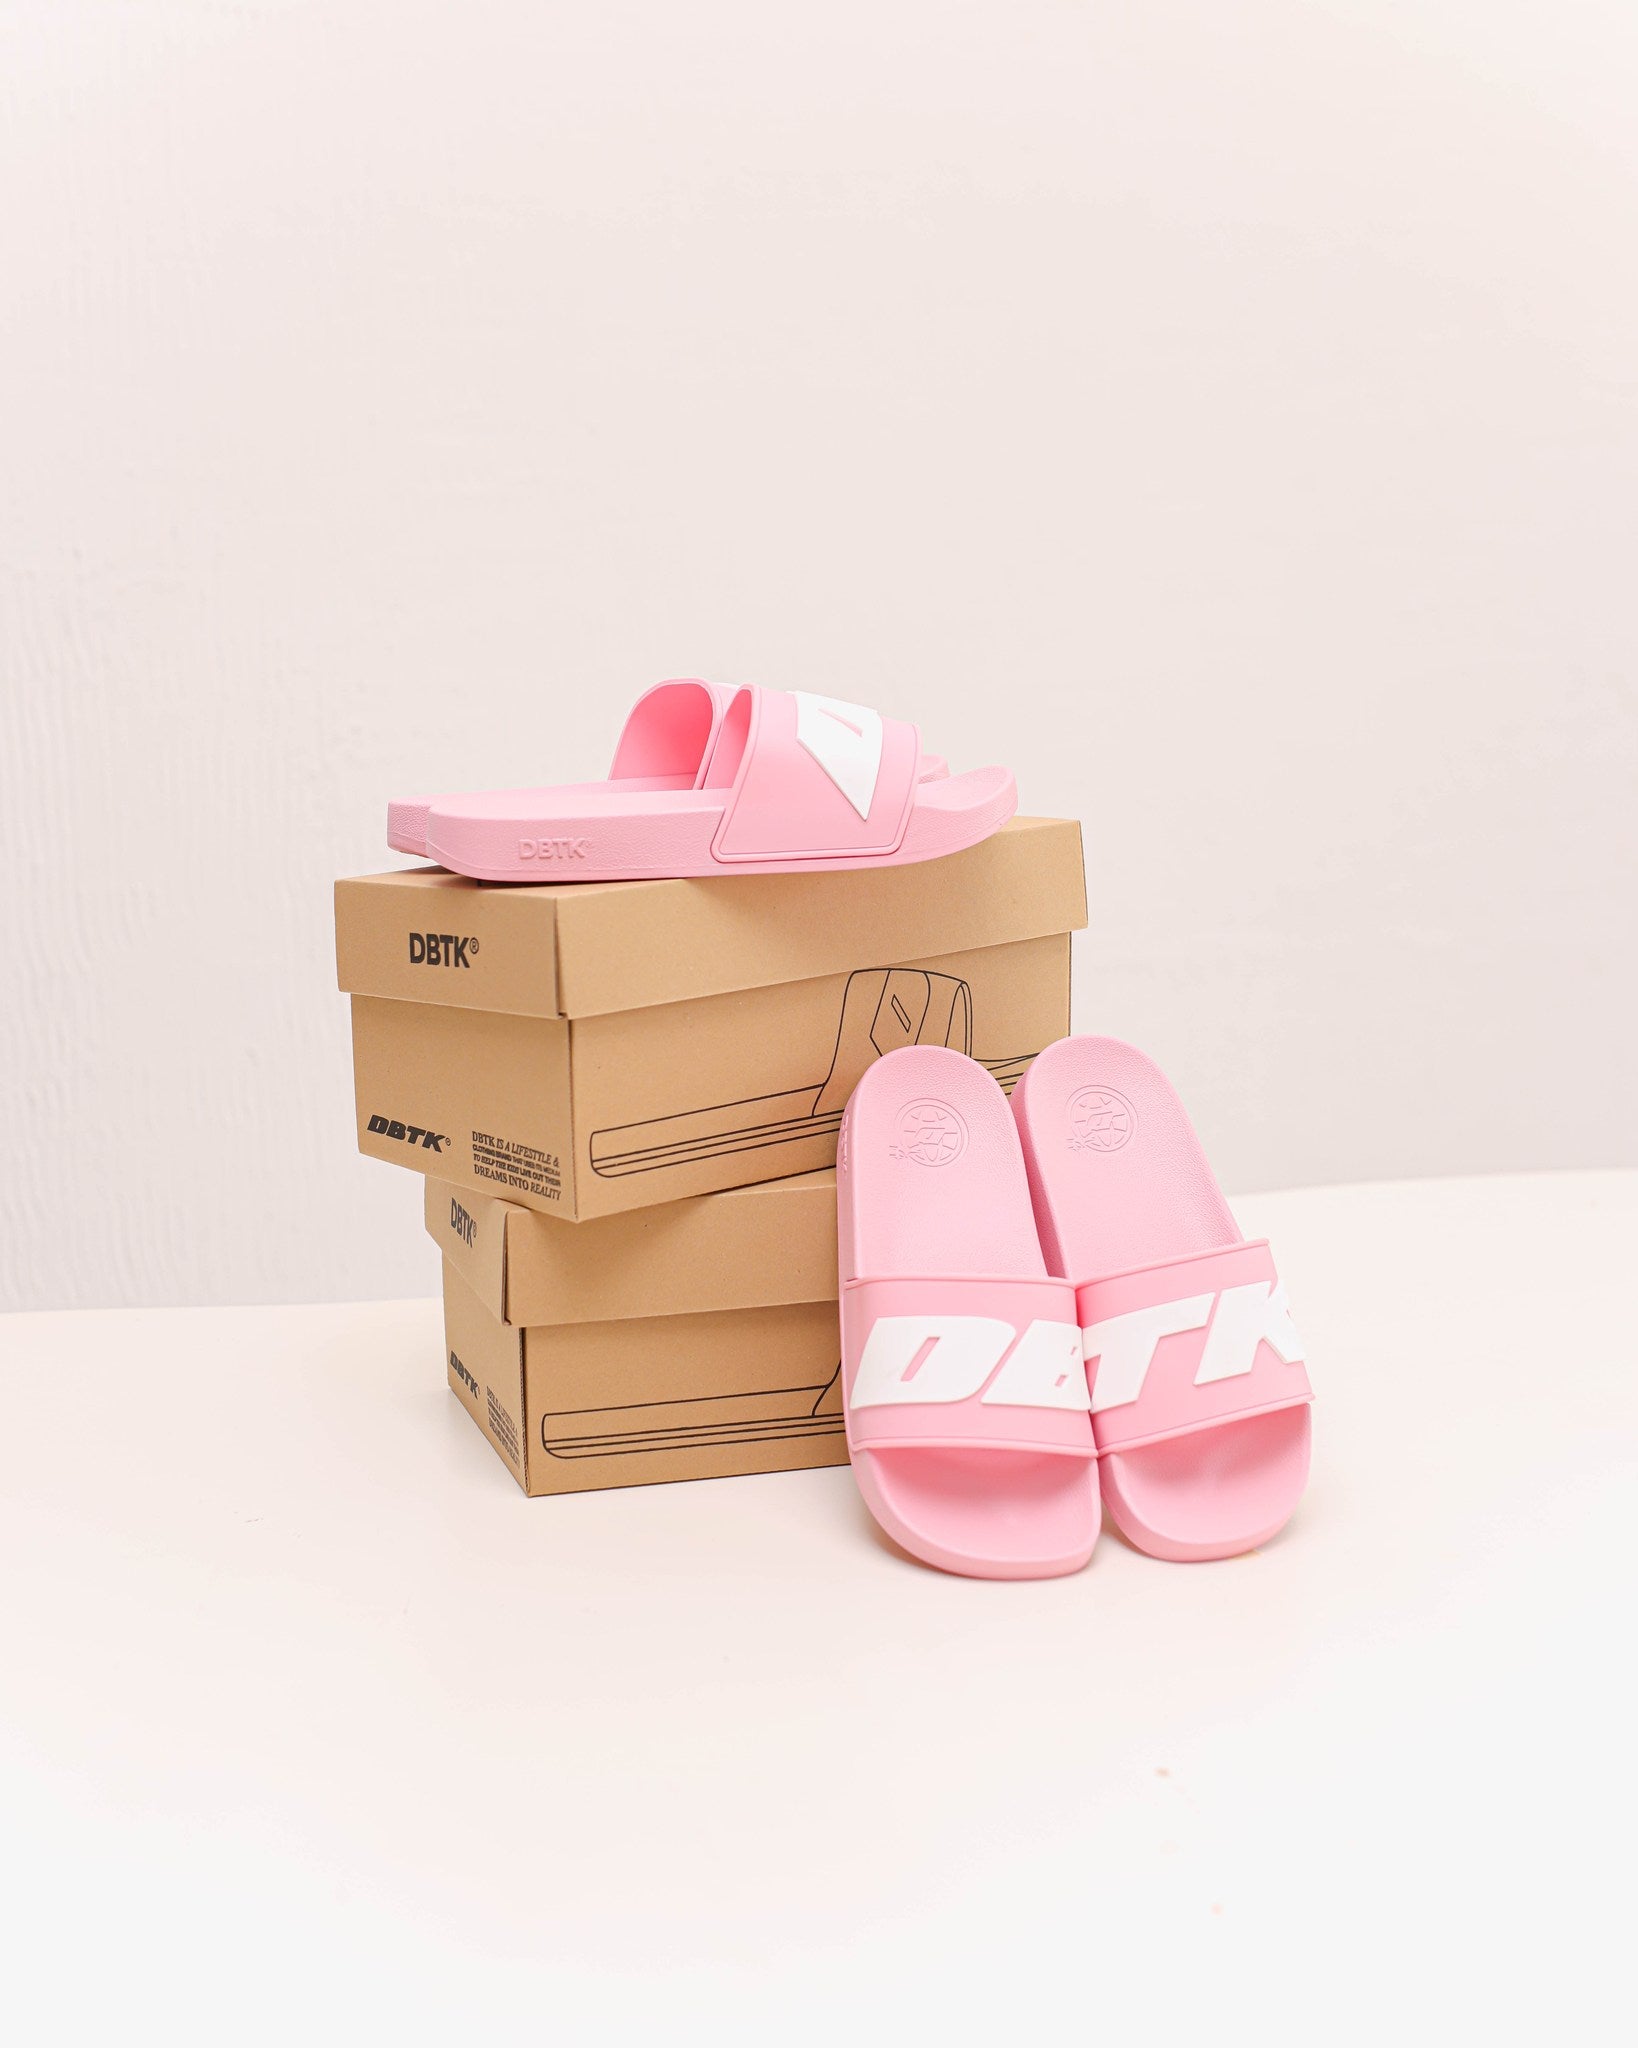 DBTK Cipher 002 Slides - PINK (exclusive for Women's Sizing only).